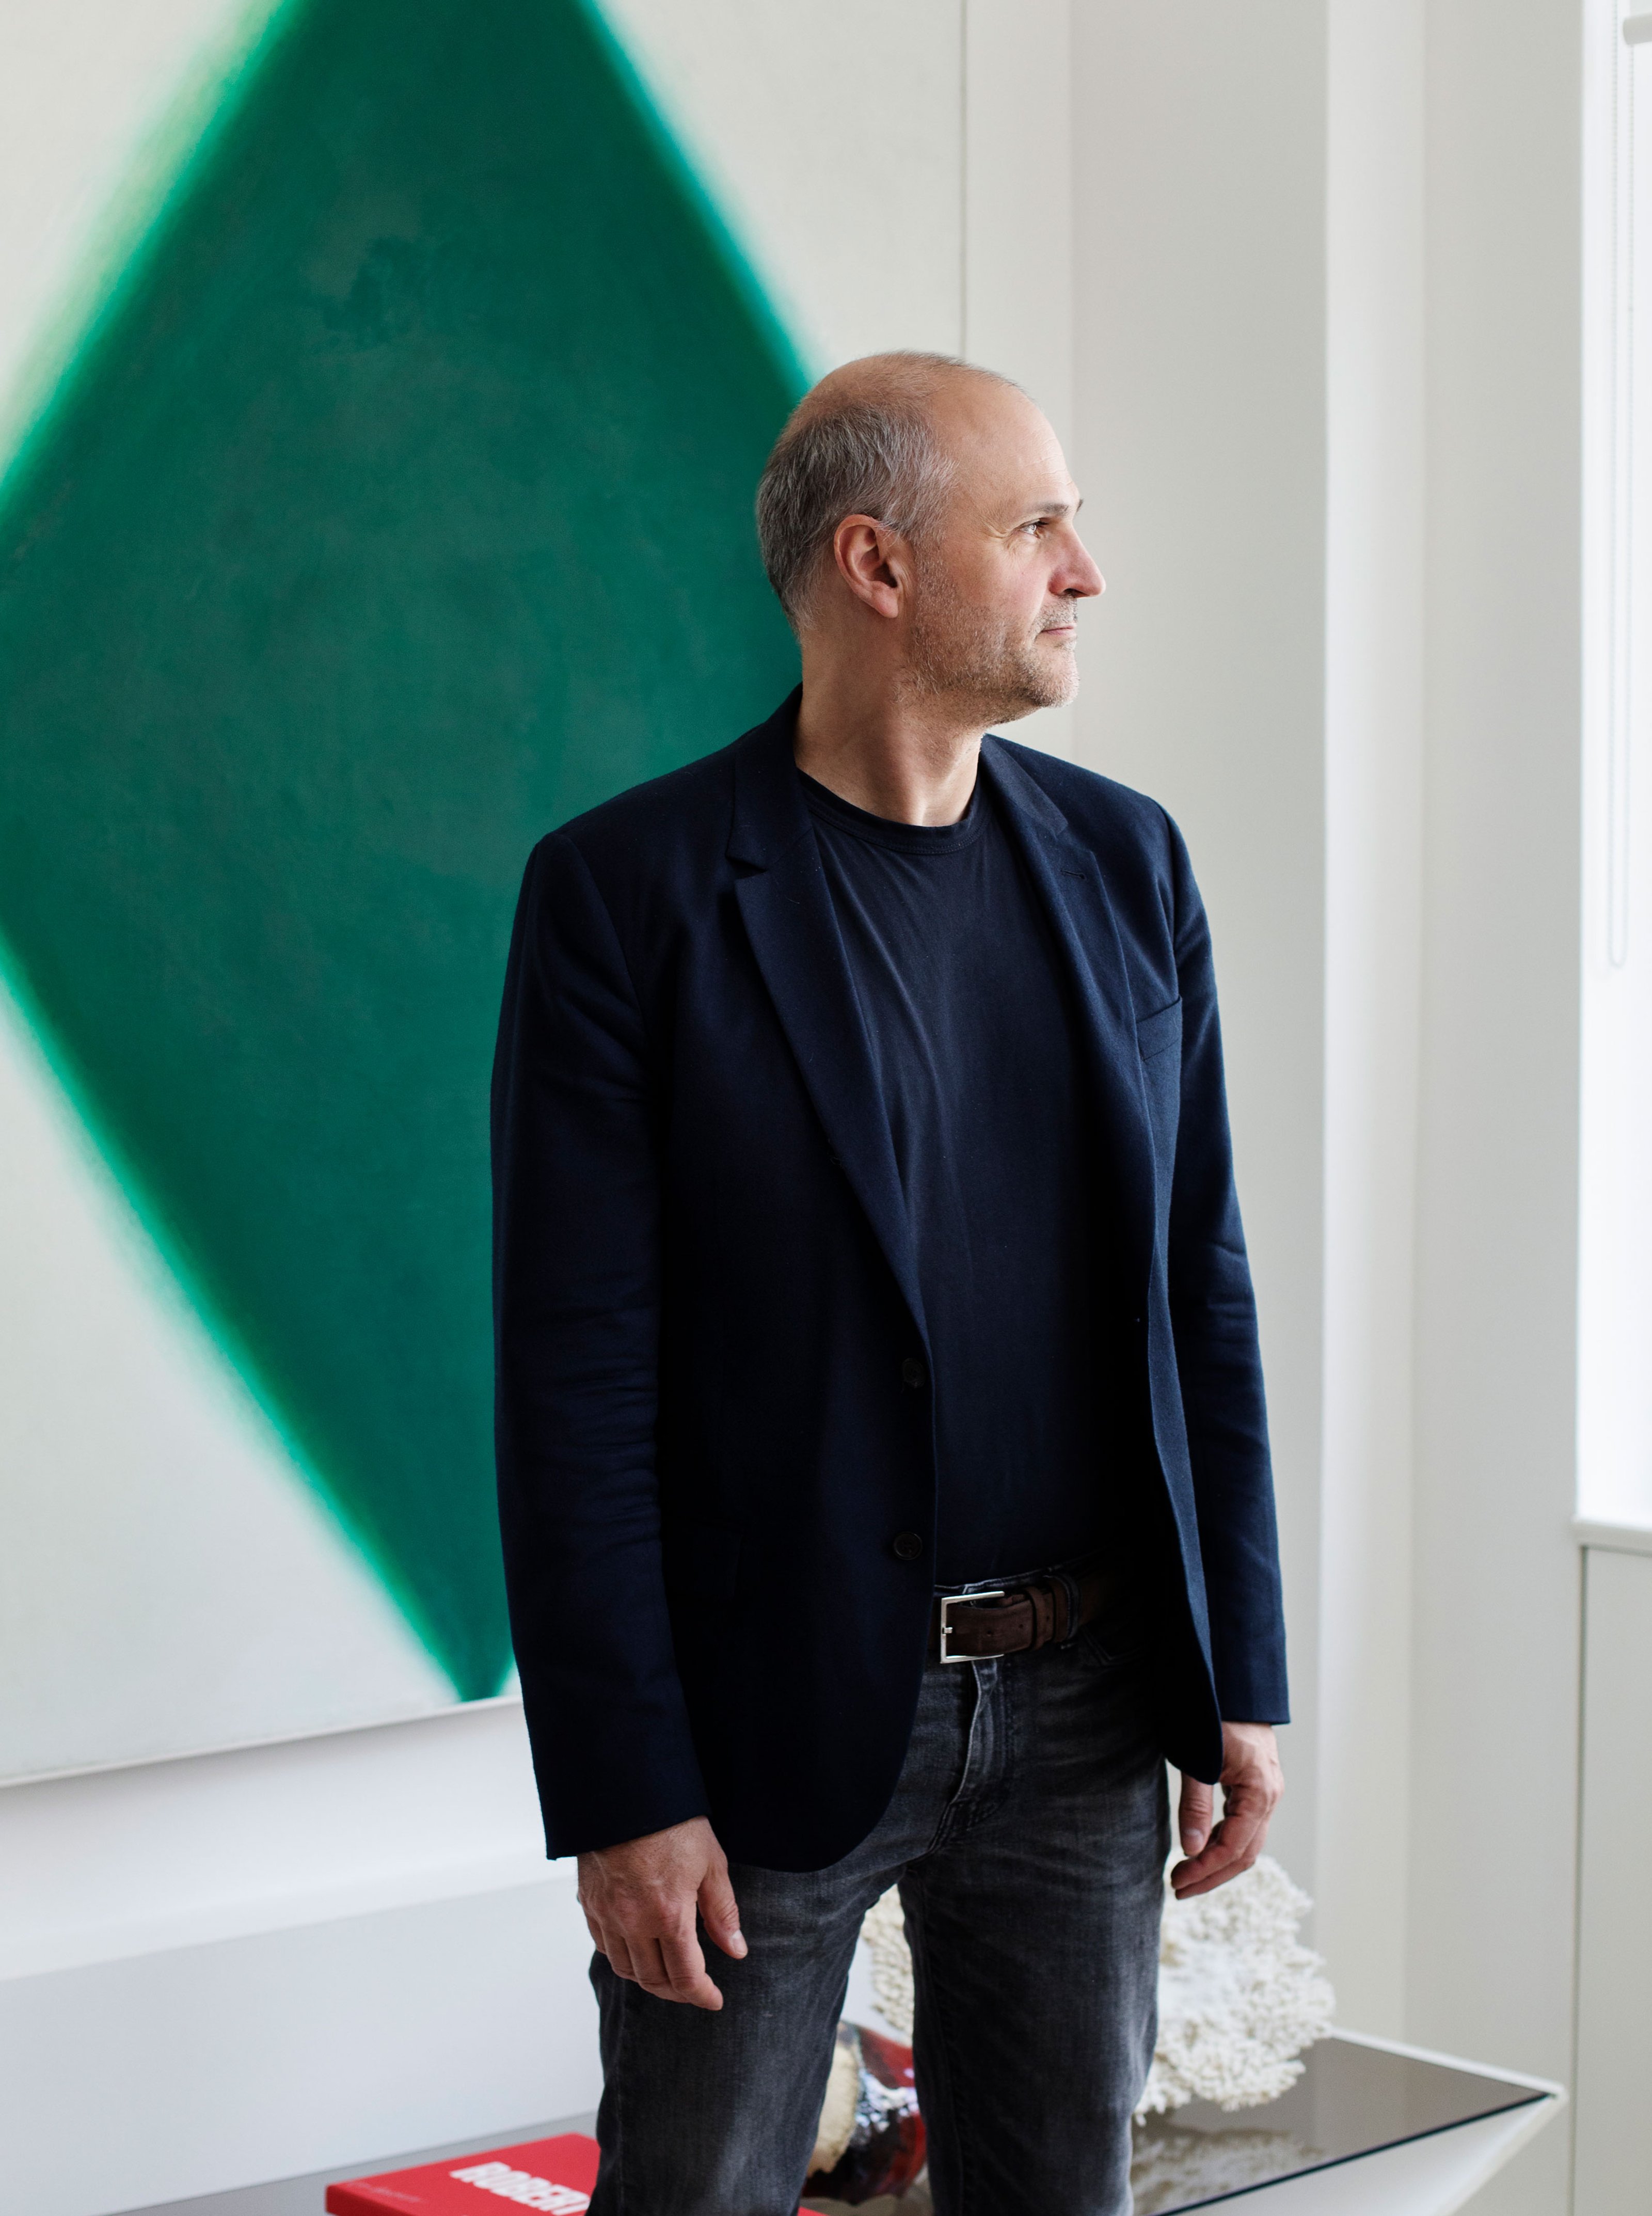 Photo of Giovanni Springmeier in front of a green painting